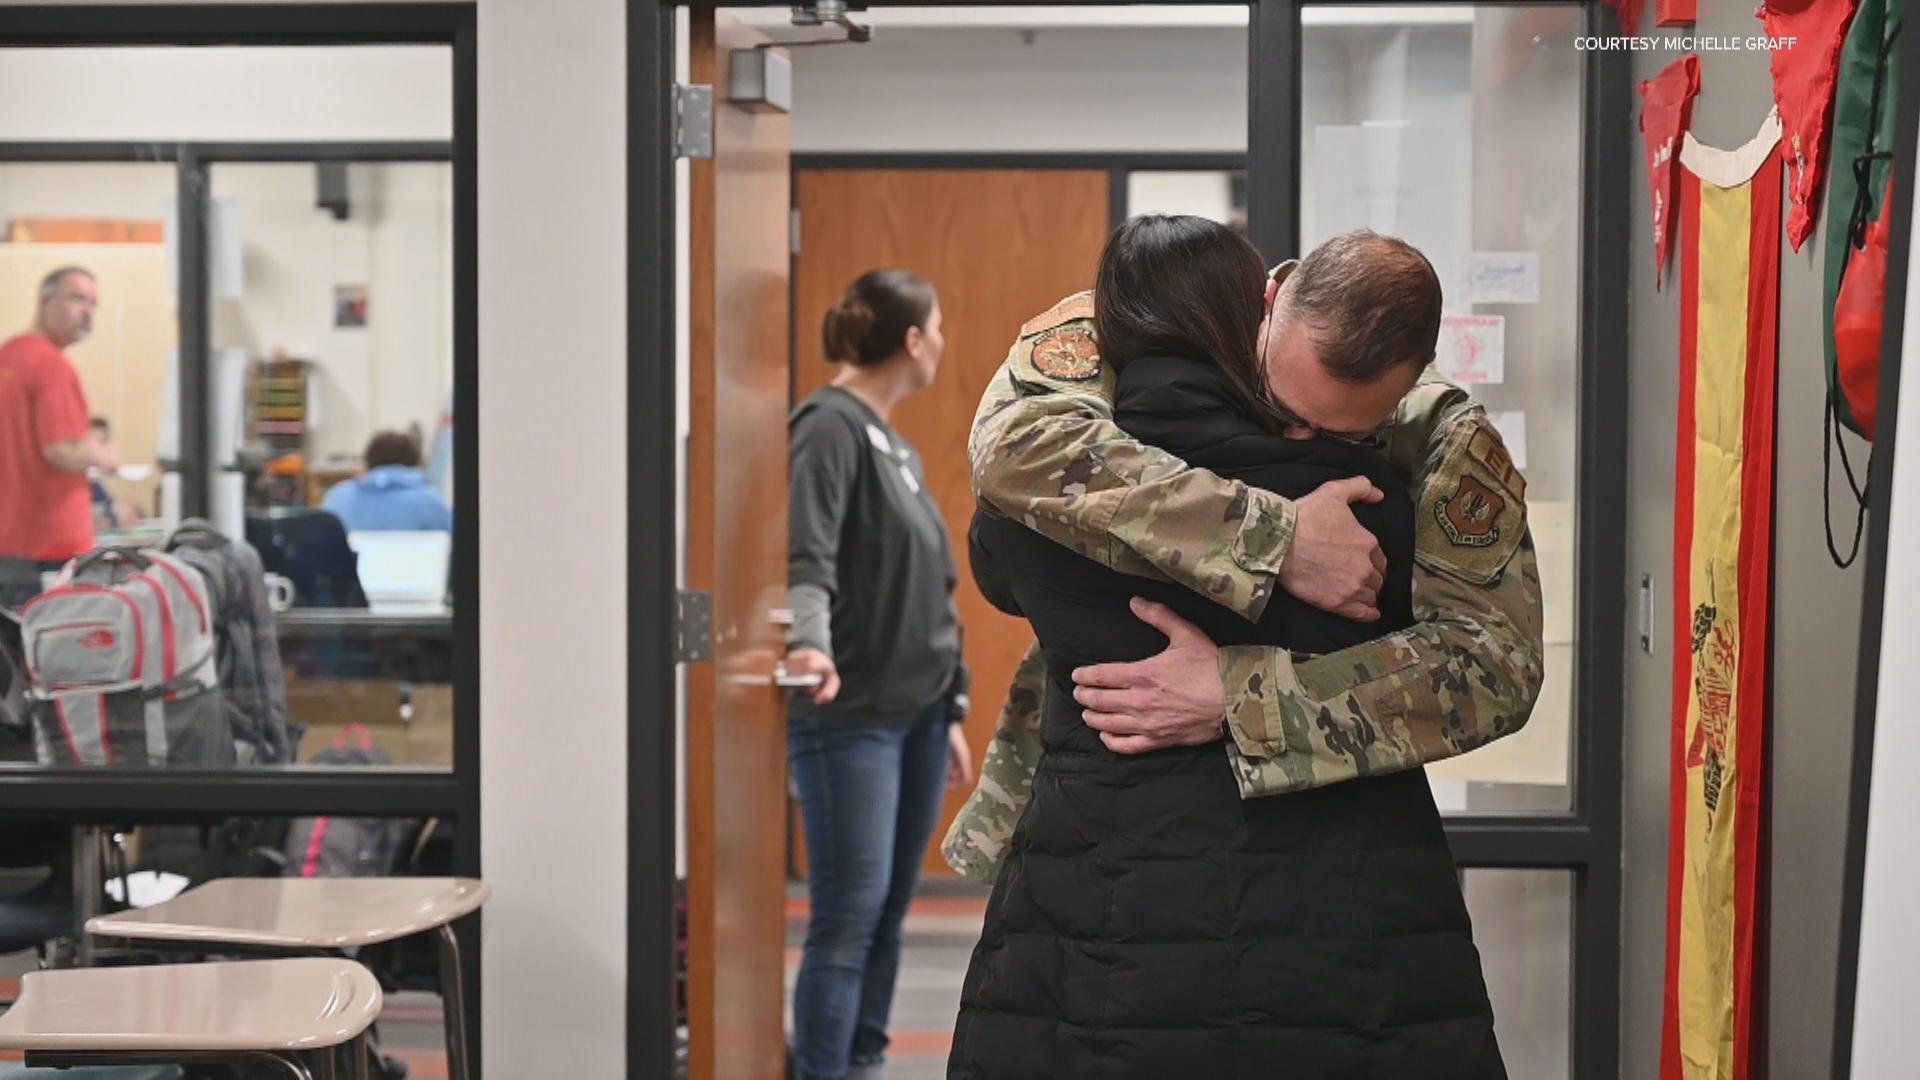 Brent Shouler, a captain in the Air National Guard, surprised his kids at school after being deployed to Africa.